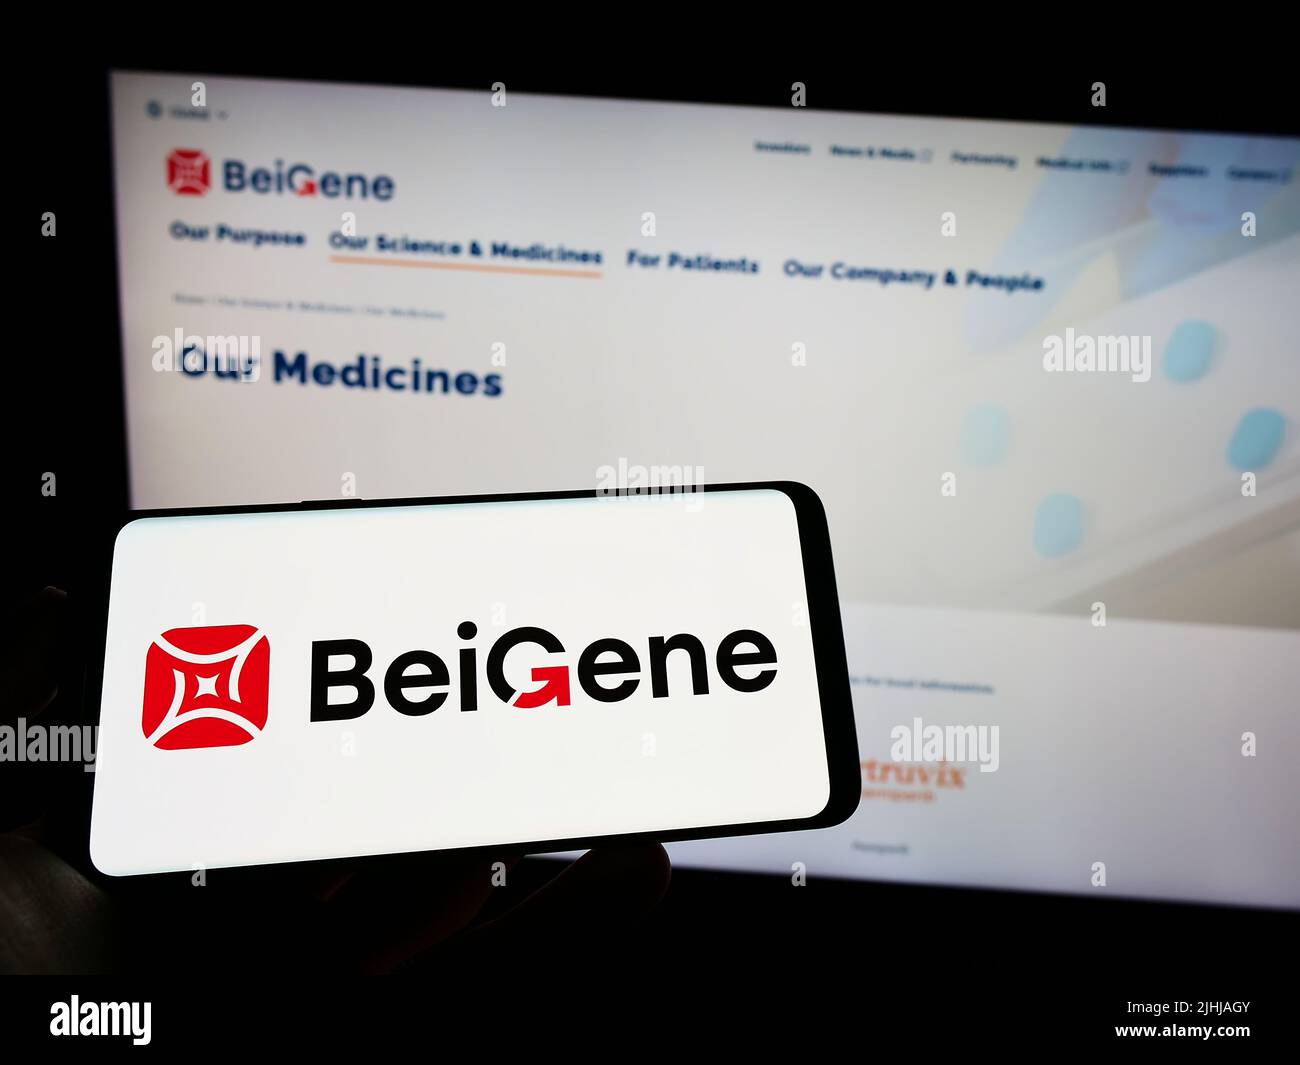 Person holding cellphone with logo of Chinese biotechnology company Beigene Ltd. on screen in front of business webpage. Focus on phone display. Stock Photo